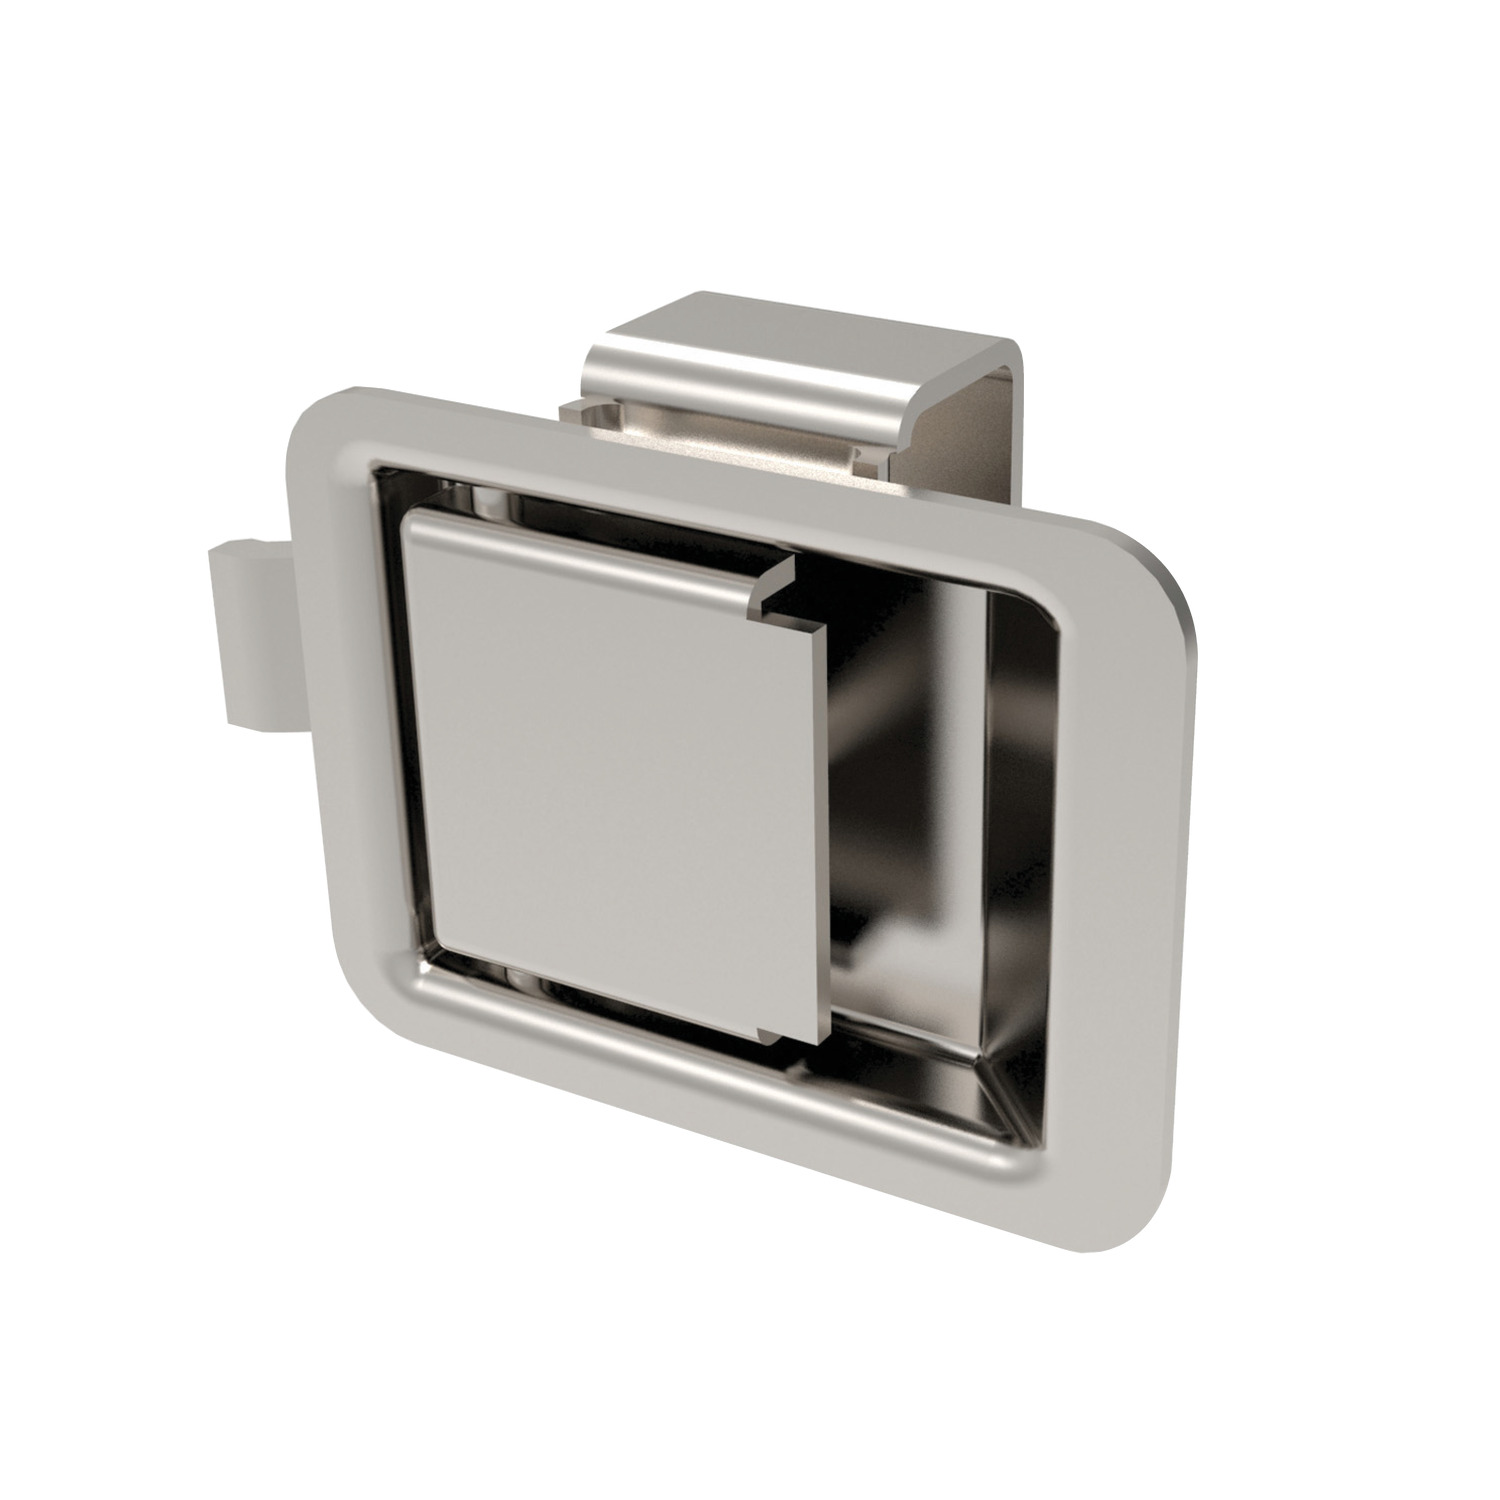 Push To Close Paddle Latches Made from Stainless Steel. Fully integrated lock, latch and flush fitting paddle handle.